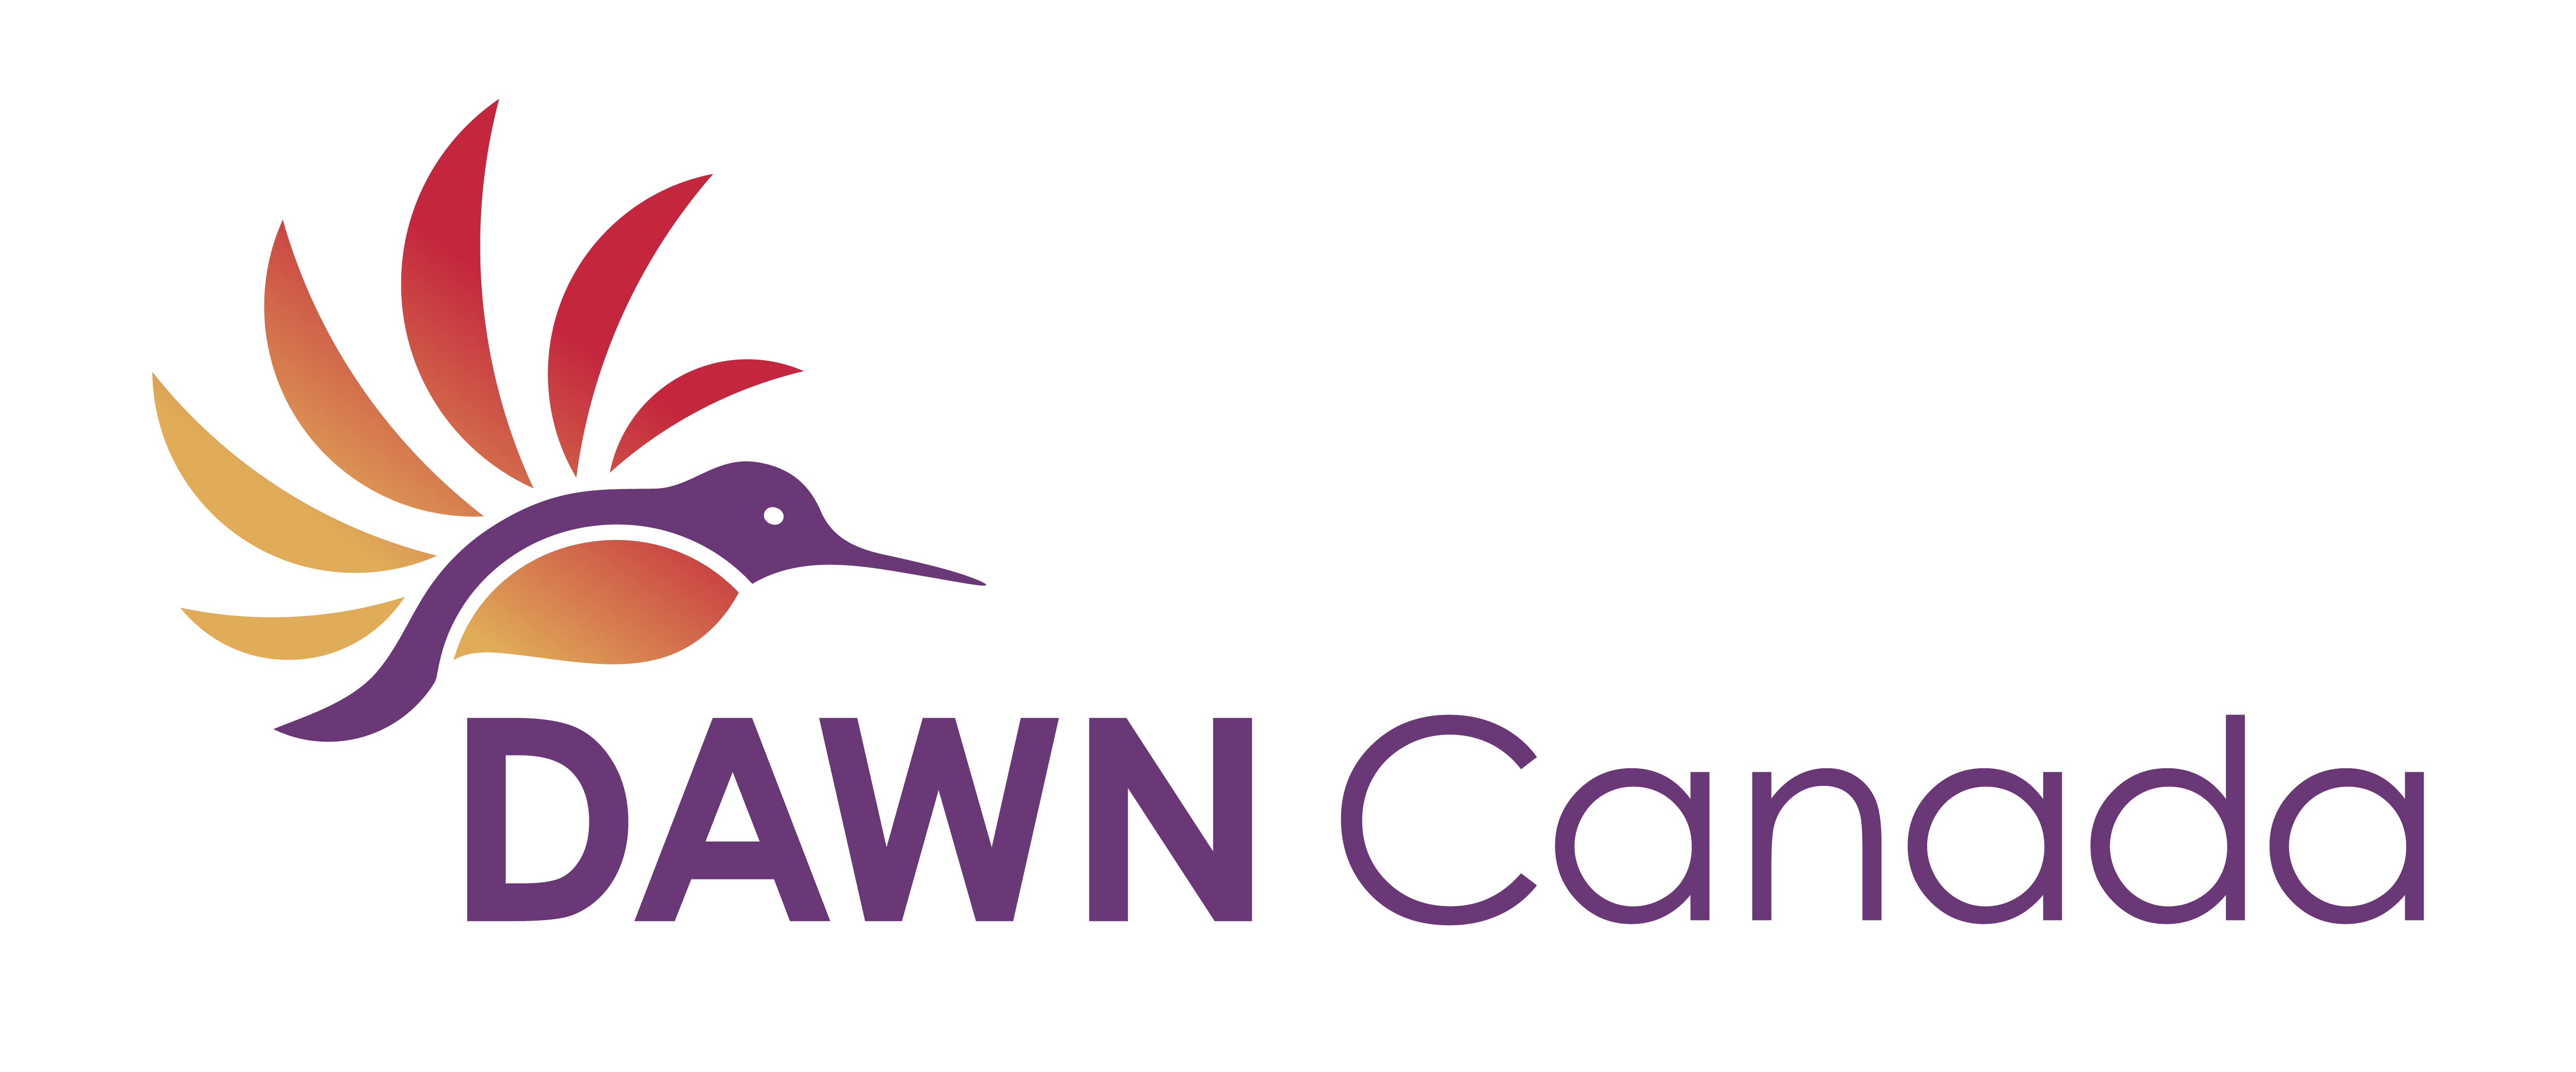 DAWN Canada logo, a hummingbird facing right. The wings and belly show a rising sun